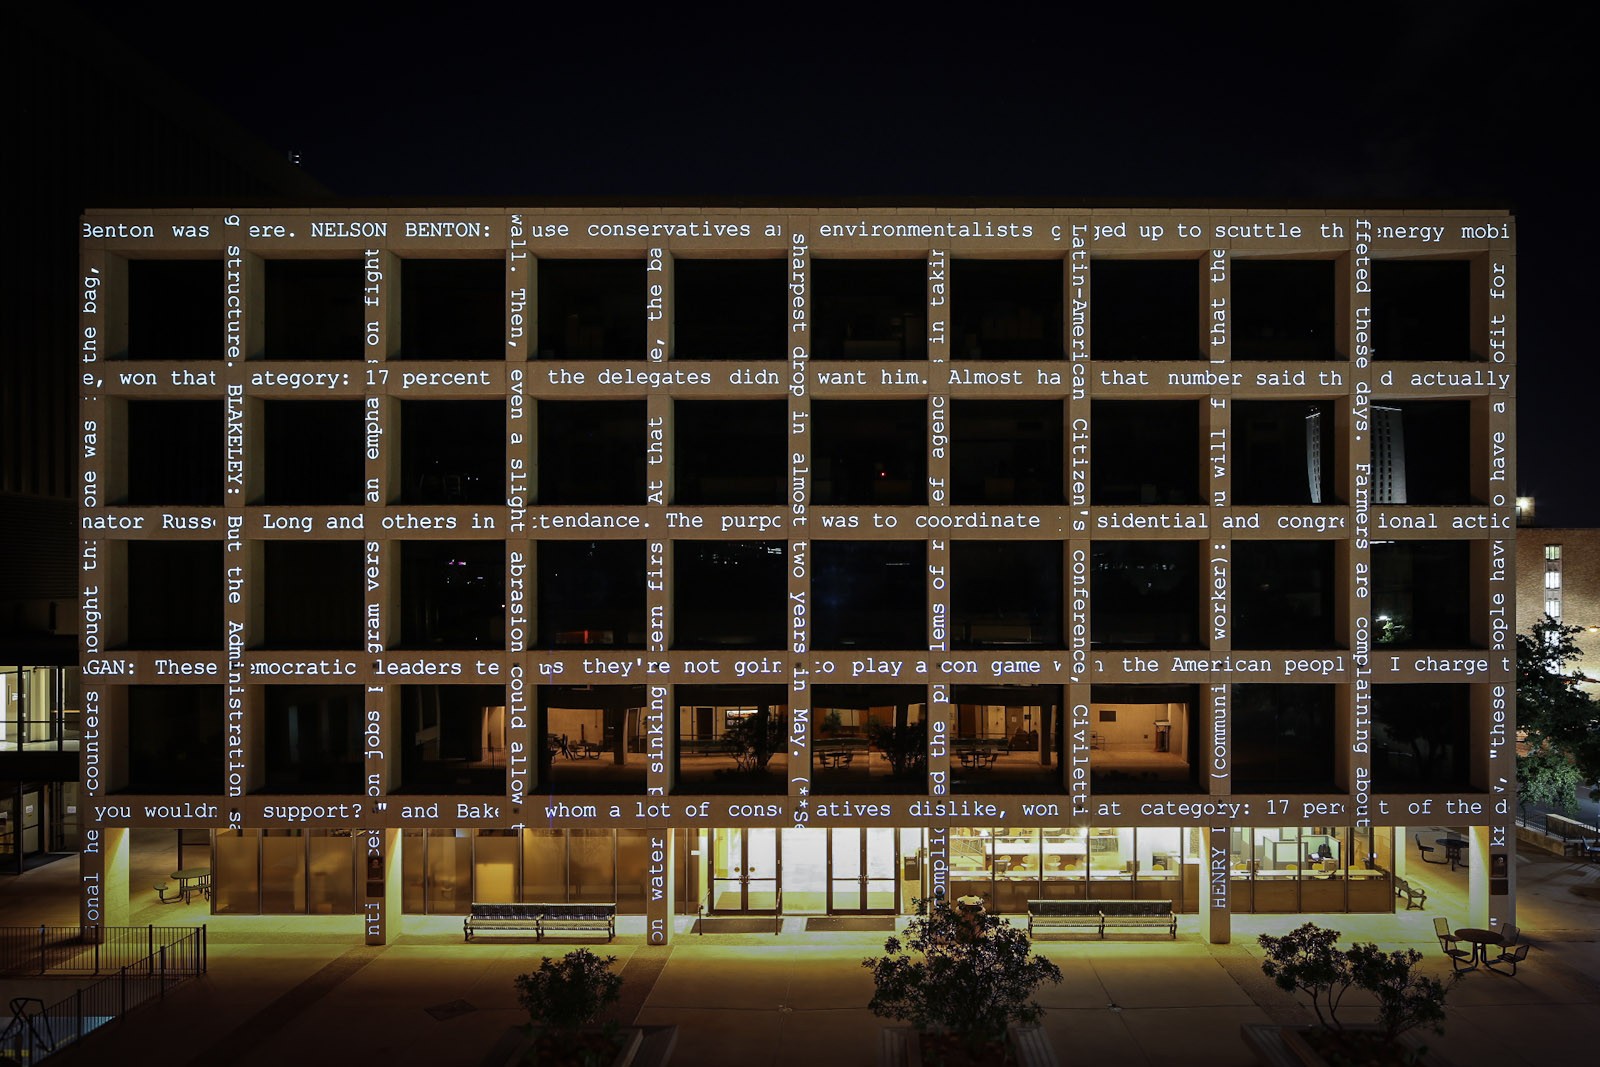 A grid-like building which has text projected across the facade. 